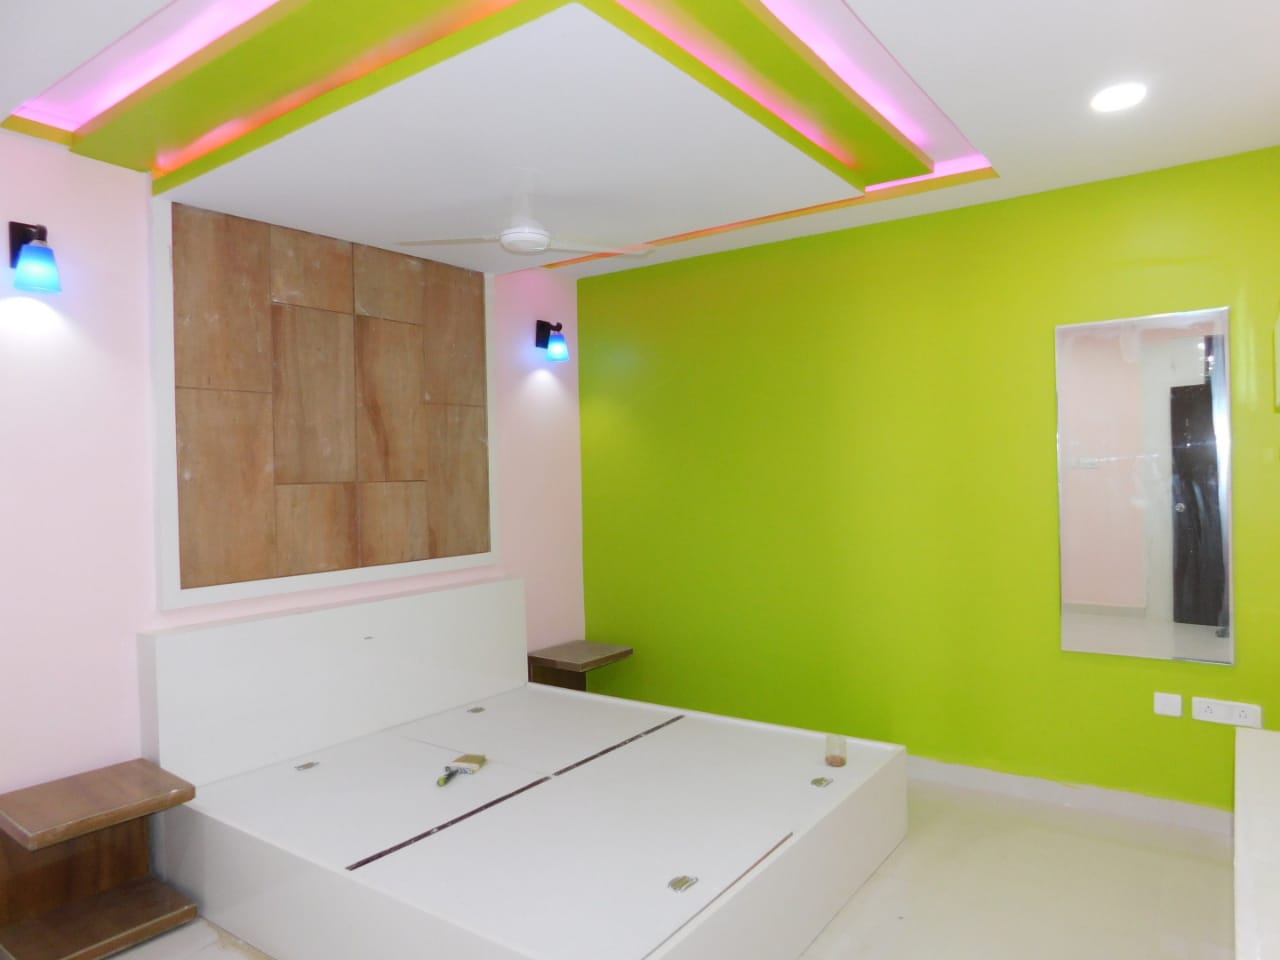 CHEAP AND BEST INTERIOR DESIGNERS IN HYDERABAD, | R7 INTERIORS | CHEAP AND BEST INTERIOR DESIGNERS IN HYDERABAD, CHEAP AND BEST INTERIOR DESIGNERS IN MANKIKONDA, CHEAP AND BEST INTERIOR DESIGNERS IN NARSINGI, CHEAP AND BEST INTERIOR DESIGNERS IN KONDAPUR, - GL41072